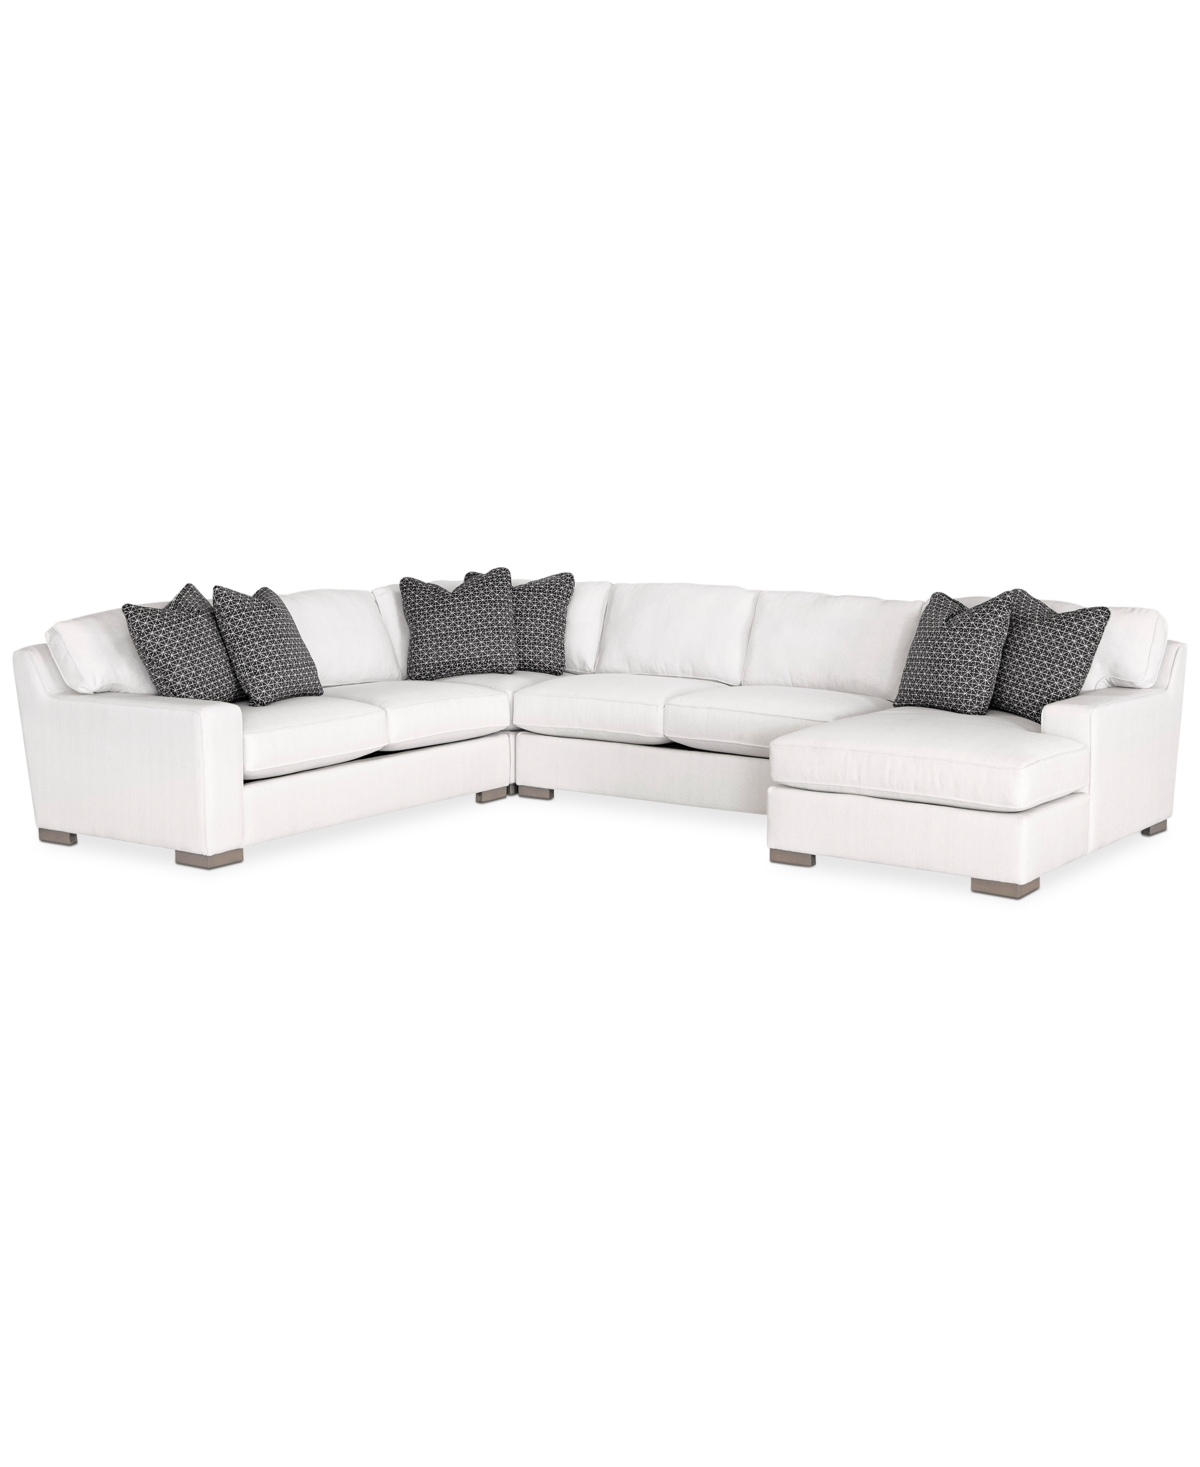 Doverly 4-Pc. Fabric Sectional, Created for Macys